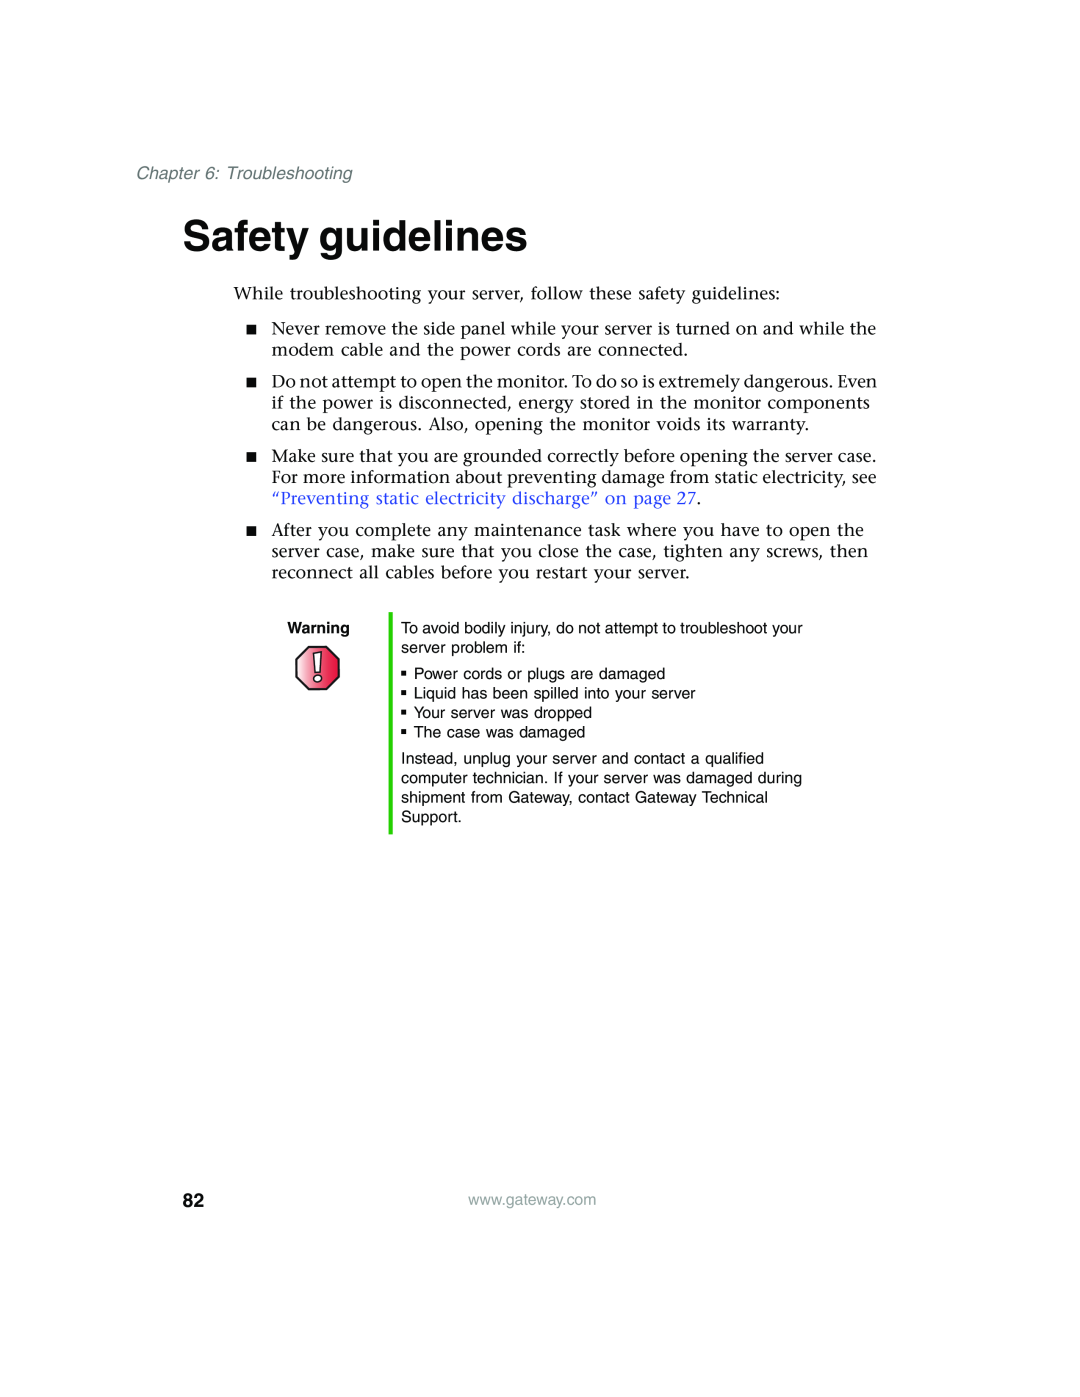 Gateway 980 manual Safety guidelines, Troubleshooting 